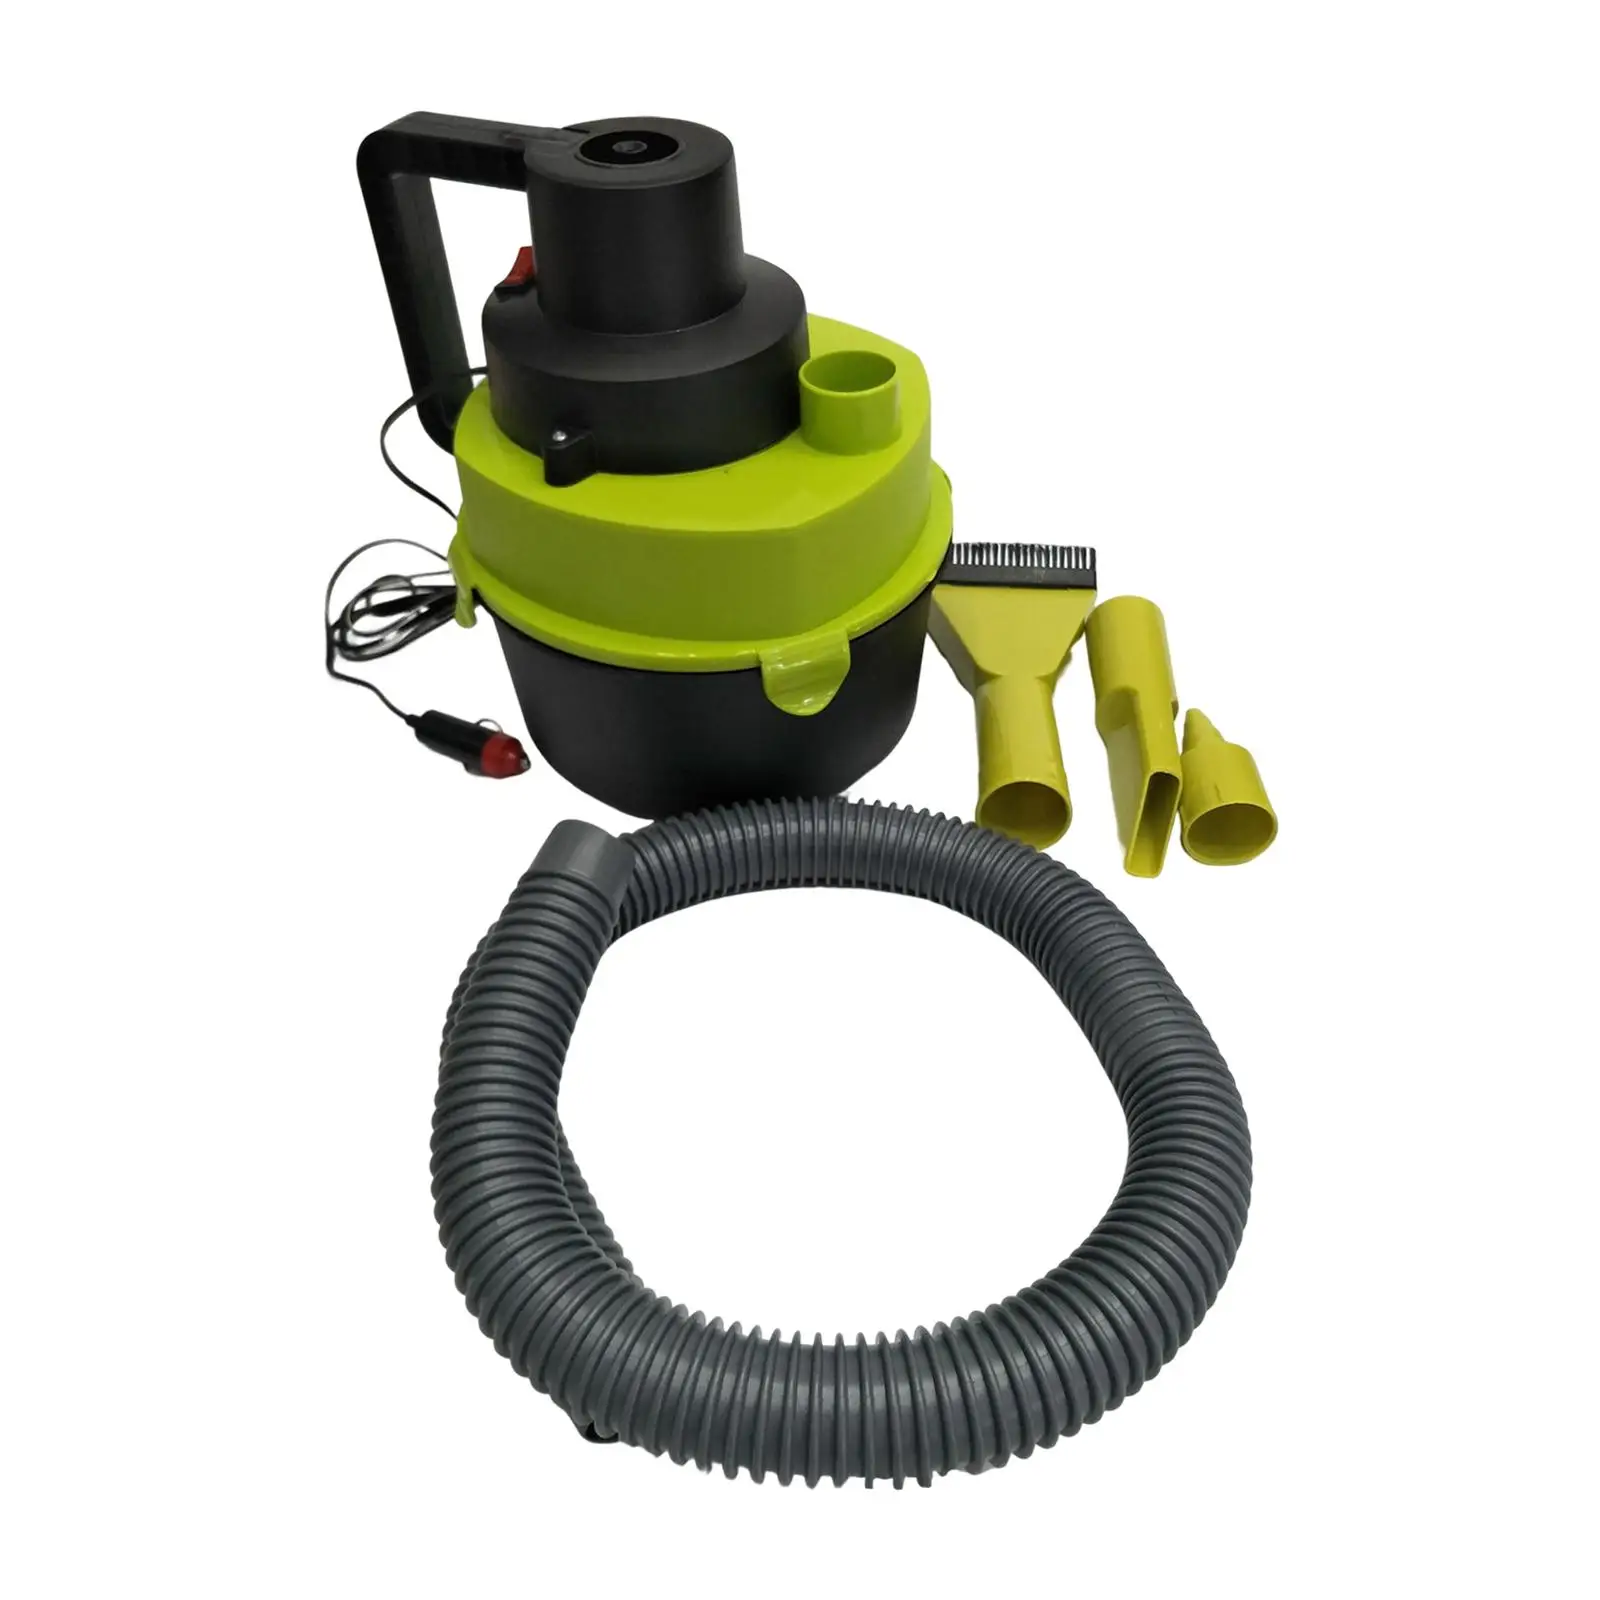 Portable Shop Vacuum with Attachments Blowing Function Dry Garbage Handheld dry wet Vacuum for Workshop Garage Corners Home RV